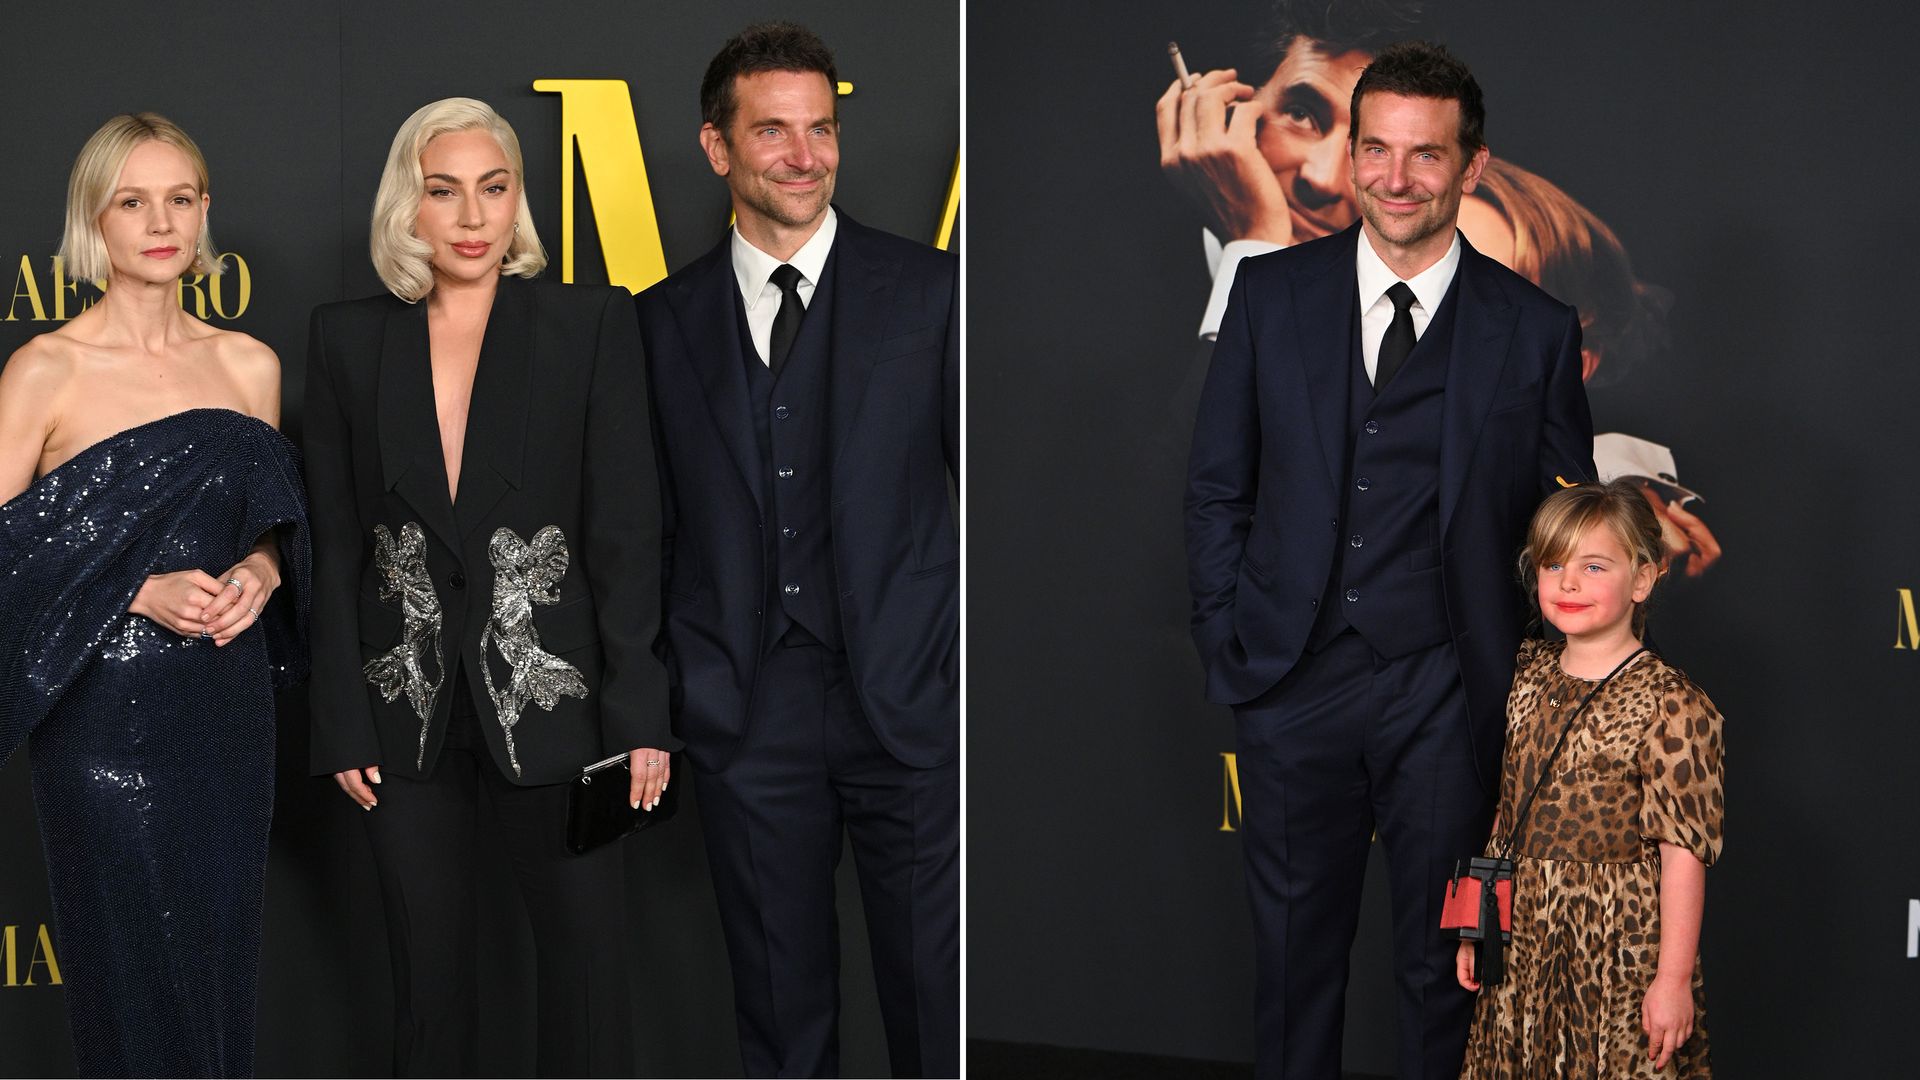 Bradley Cooper with his daughter and Lady Gaga and Carey Mulligan during the Maestro premiere